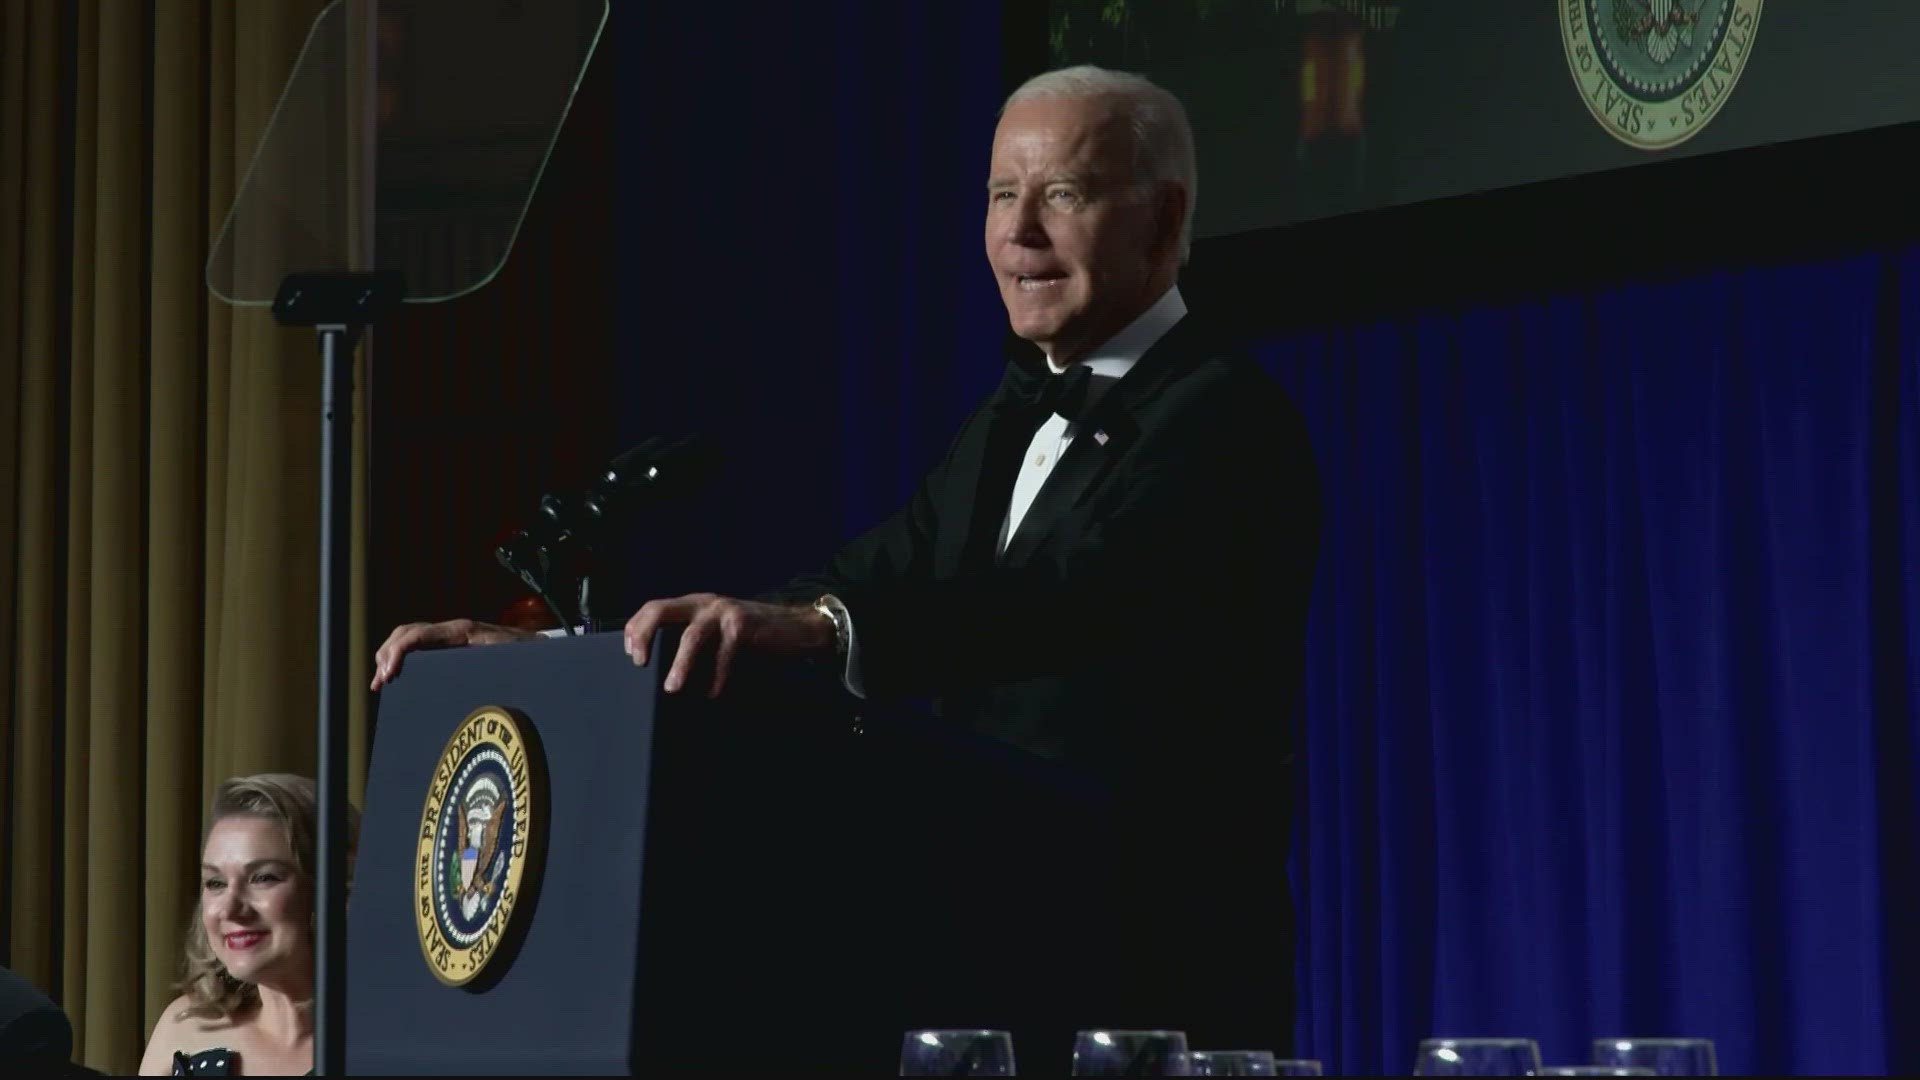 The White house Correspondence Dinner was this weekend here in D.C. It's an annual tradition in the nation's capital.